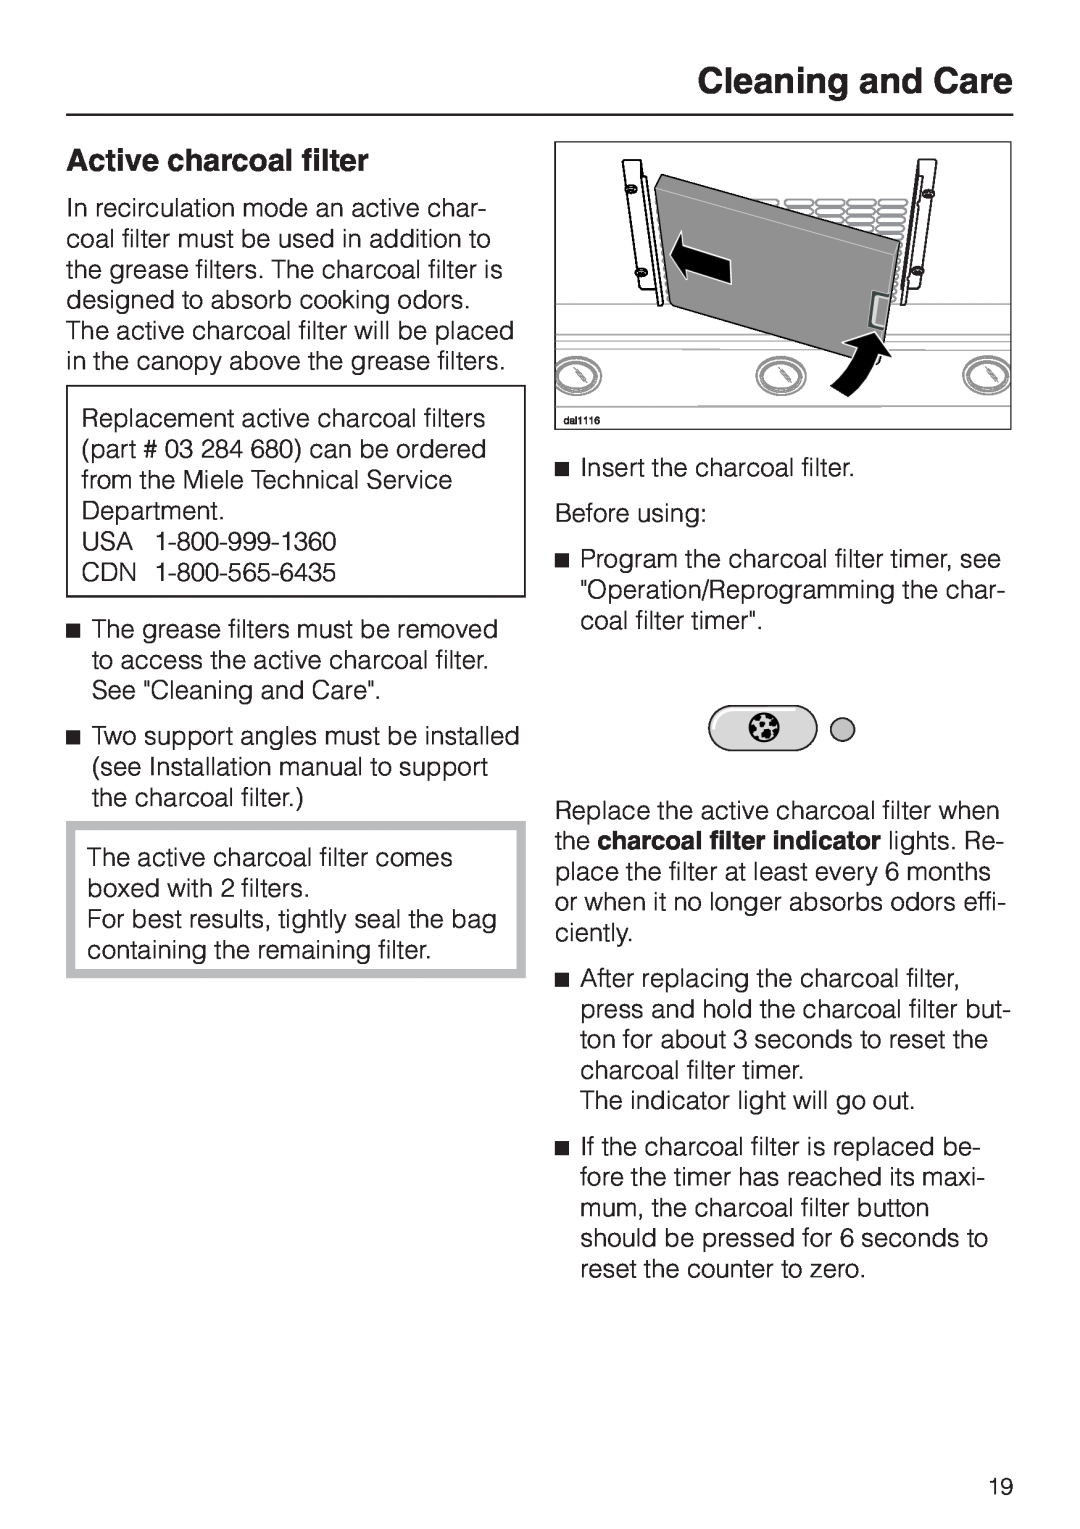 Miele DA279-3 installation instructions Active charcoal filter, Insert the charcoal filter, Cleaning and Care 